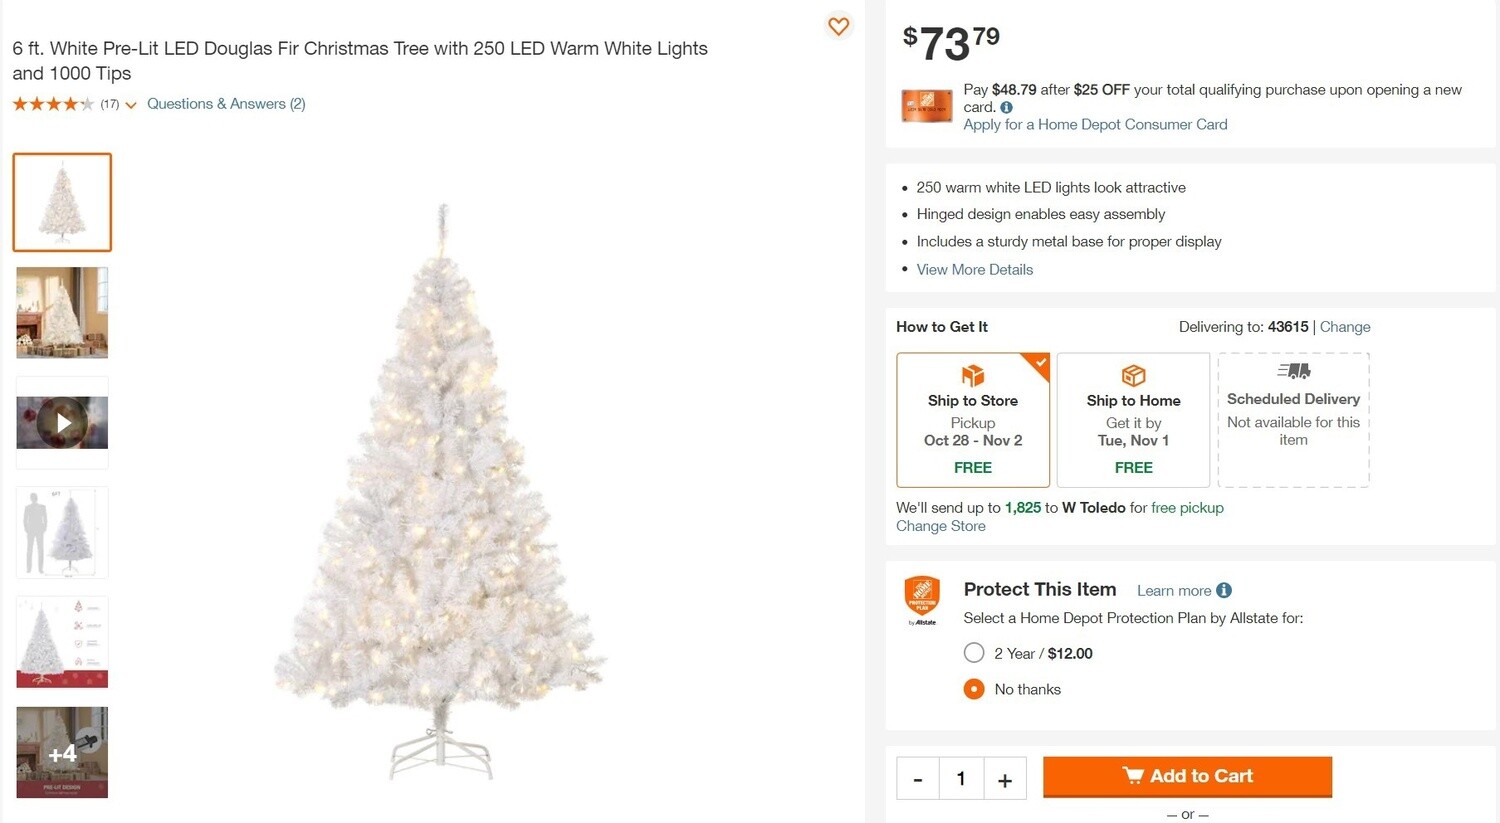 6 ft. White Pre-Lit LED Douglas Fir Christmas Tree with 250 LED Warm White Lights and 1000 Tips